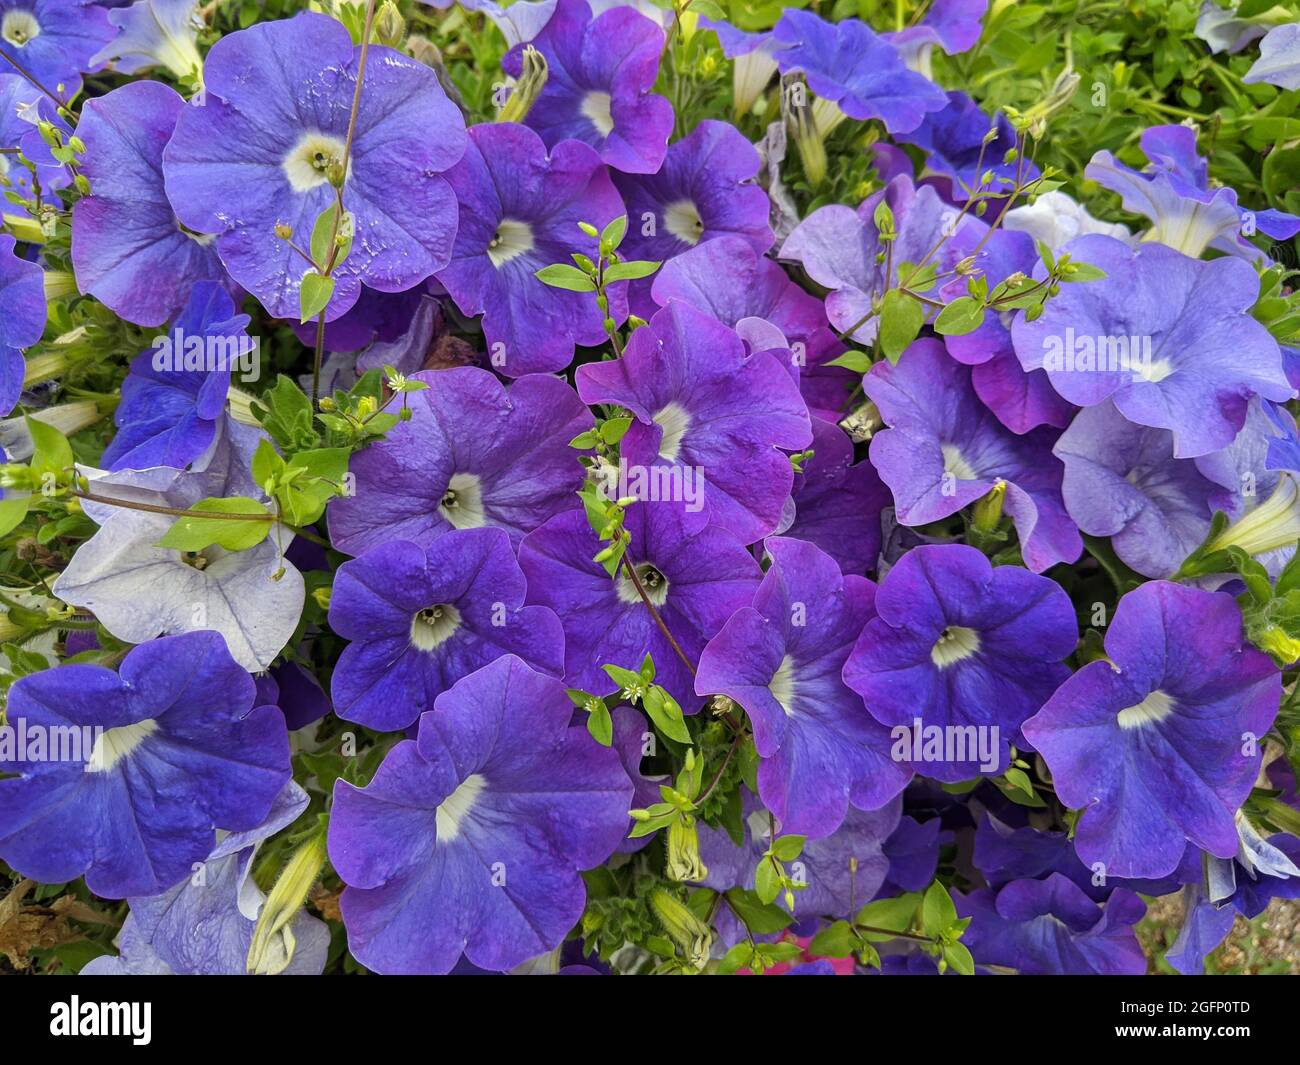 Purple petunia flowers for packaging, advertising and design. Stock Photo